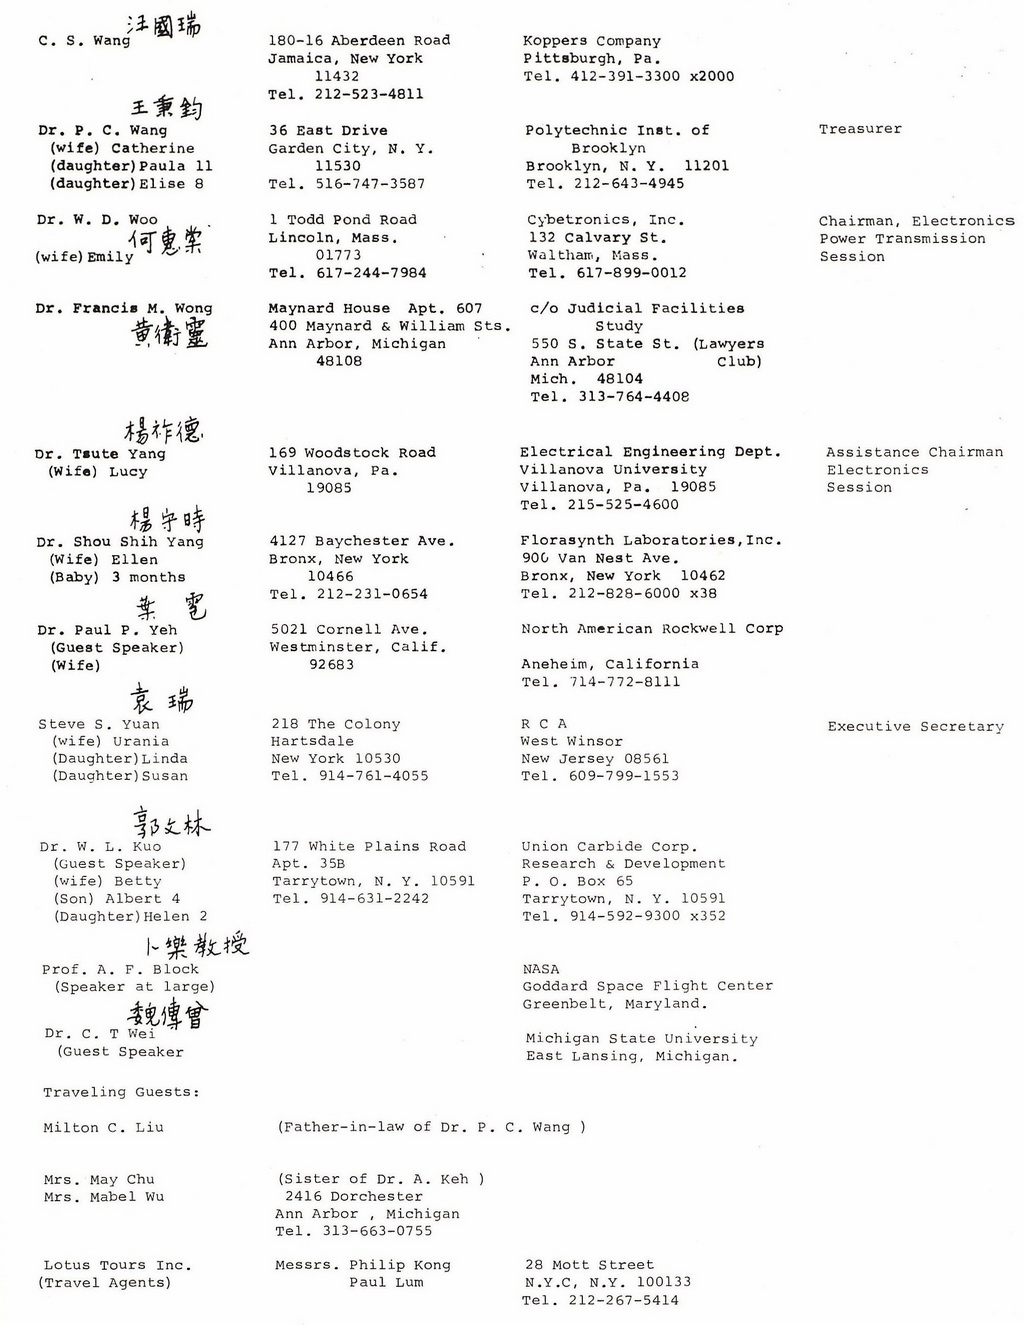 (2/2)Seminar of modern engineering and technology 1968 CIE-NY List of speakers